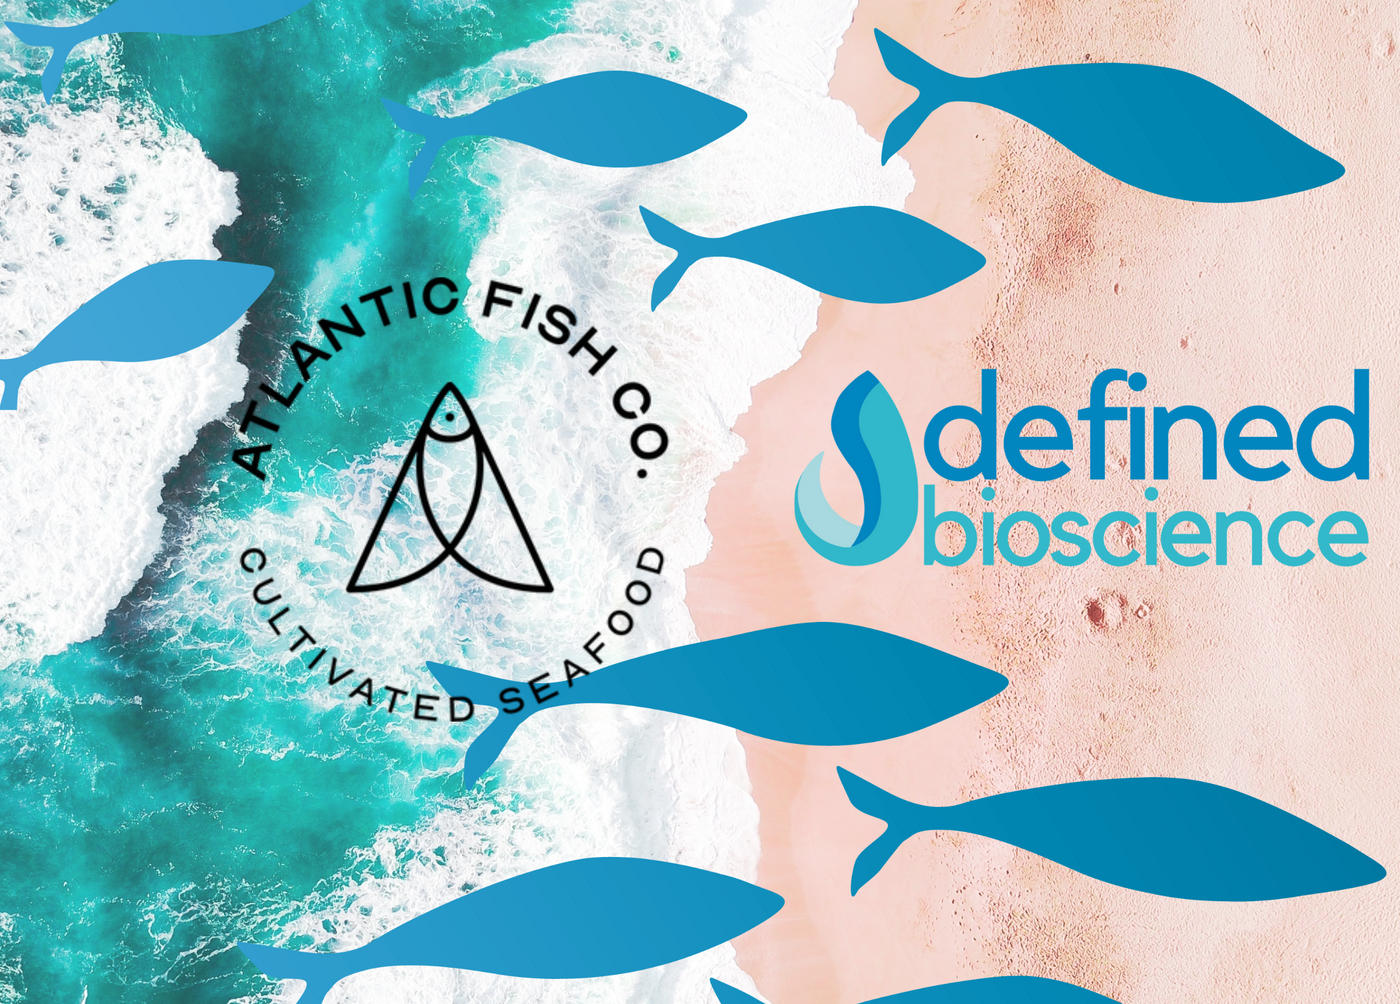 Defined Bioscience and Atlantic Fish Co. Announce Strategic Collaboration to Advance Cultivated Seafood